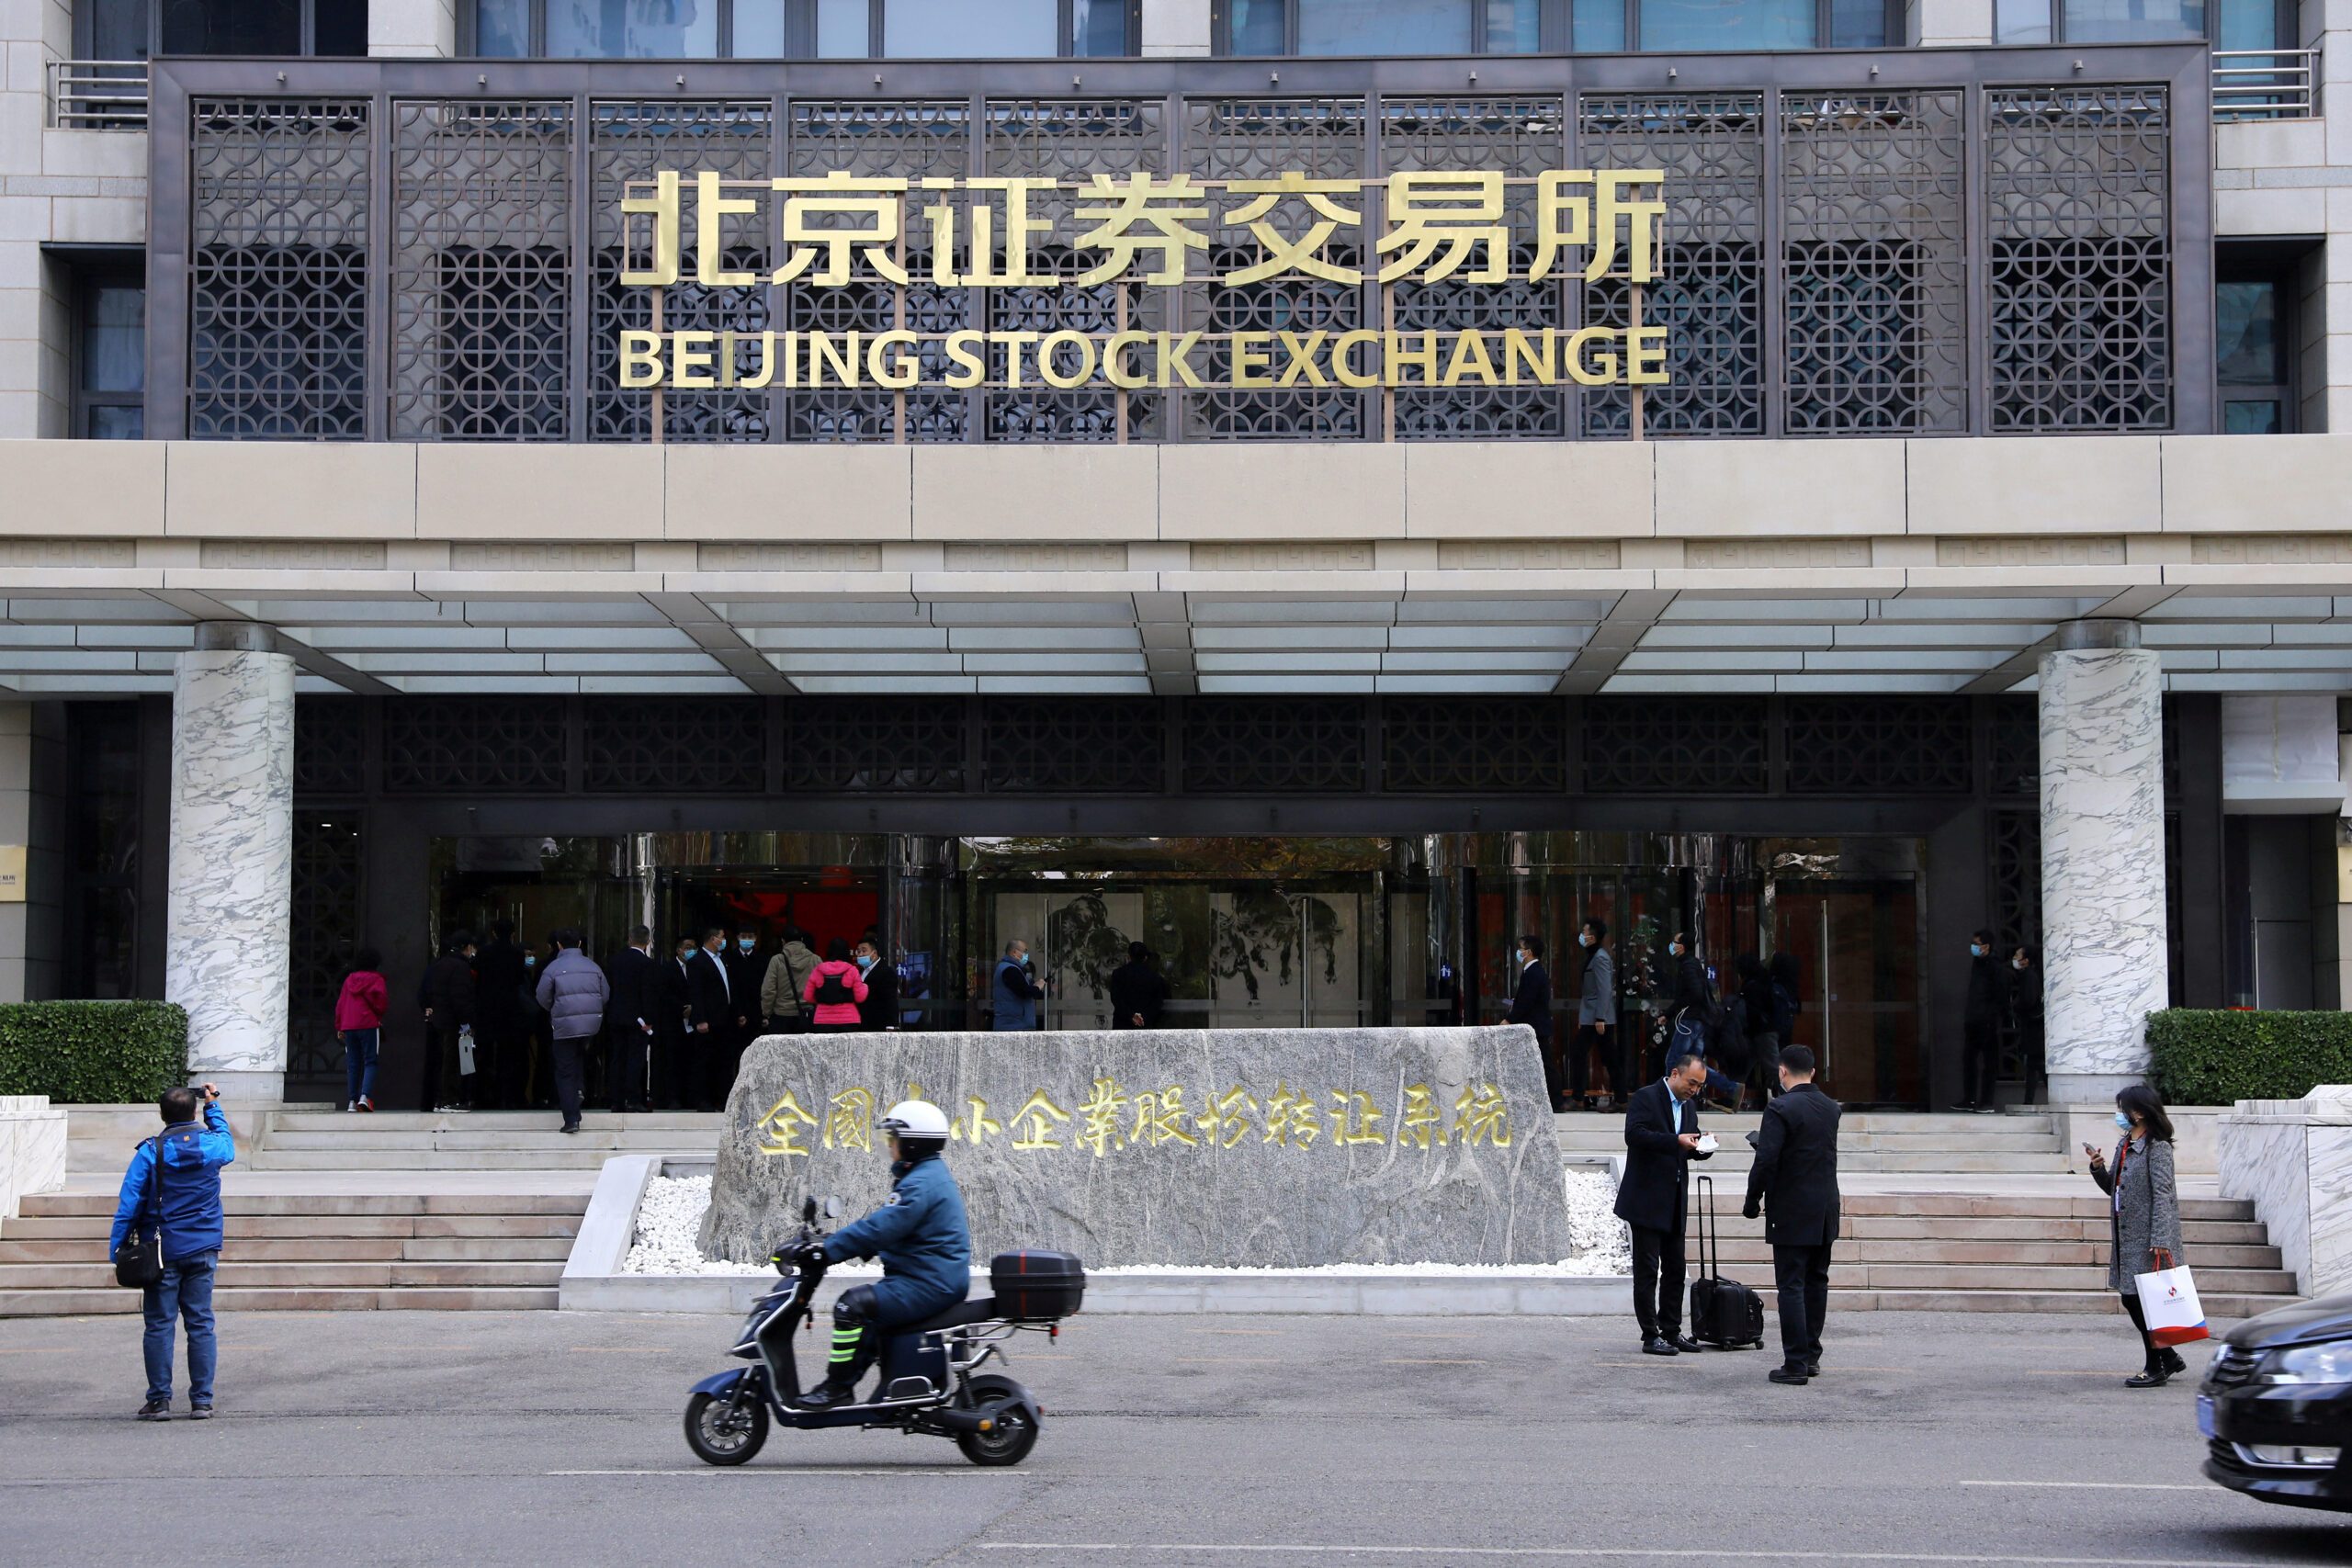 Mainland China-listed companies heed government's call to prop up stock market